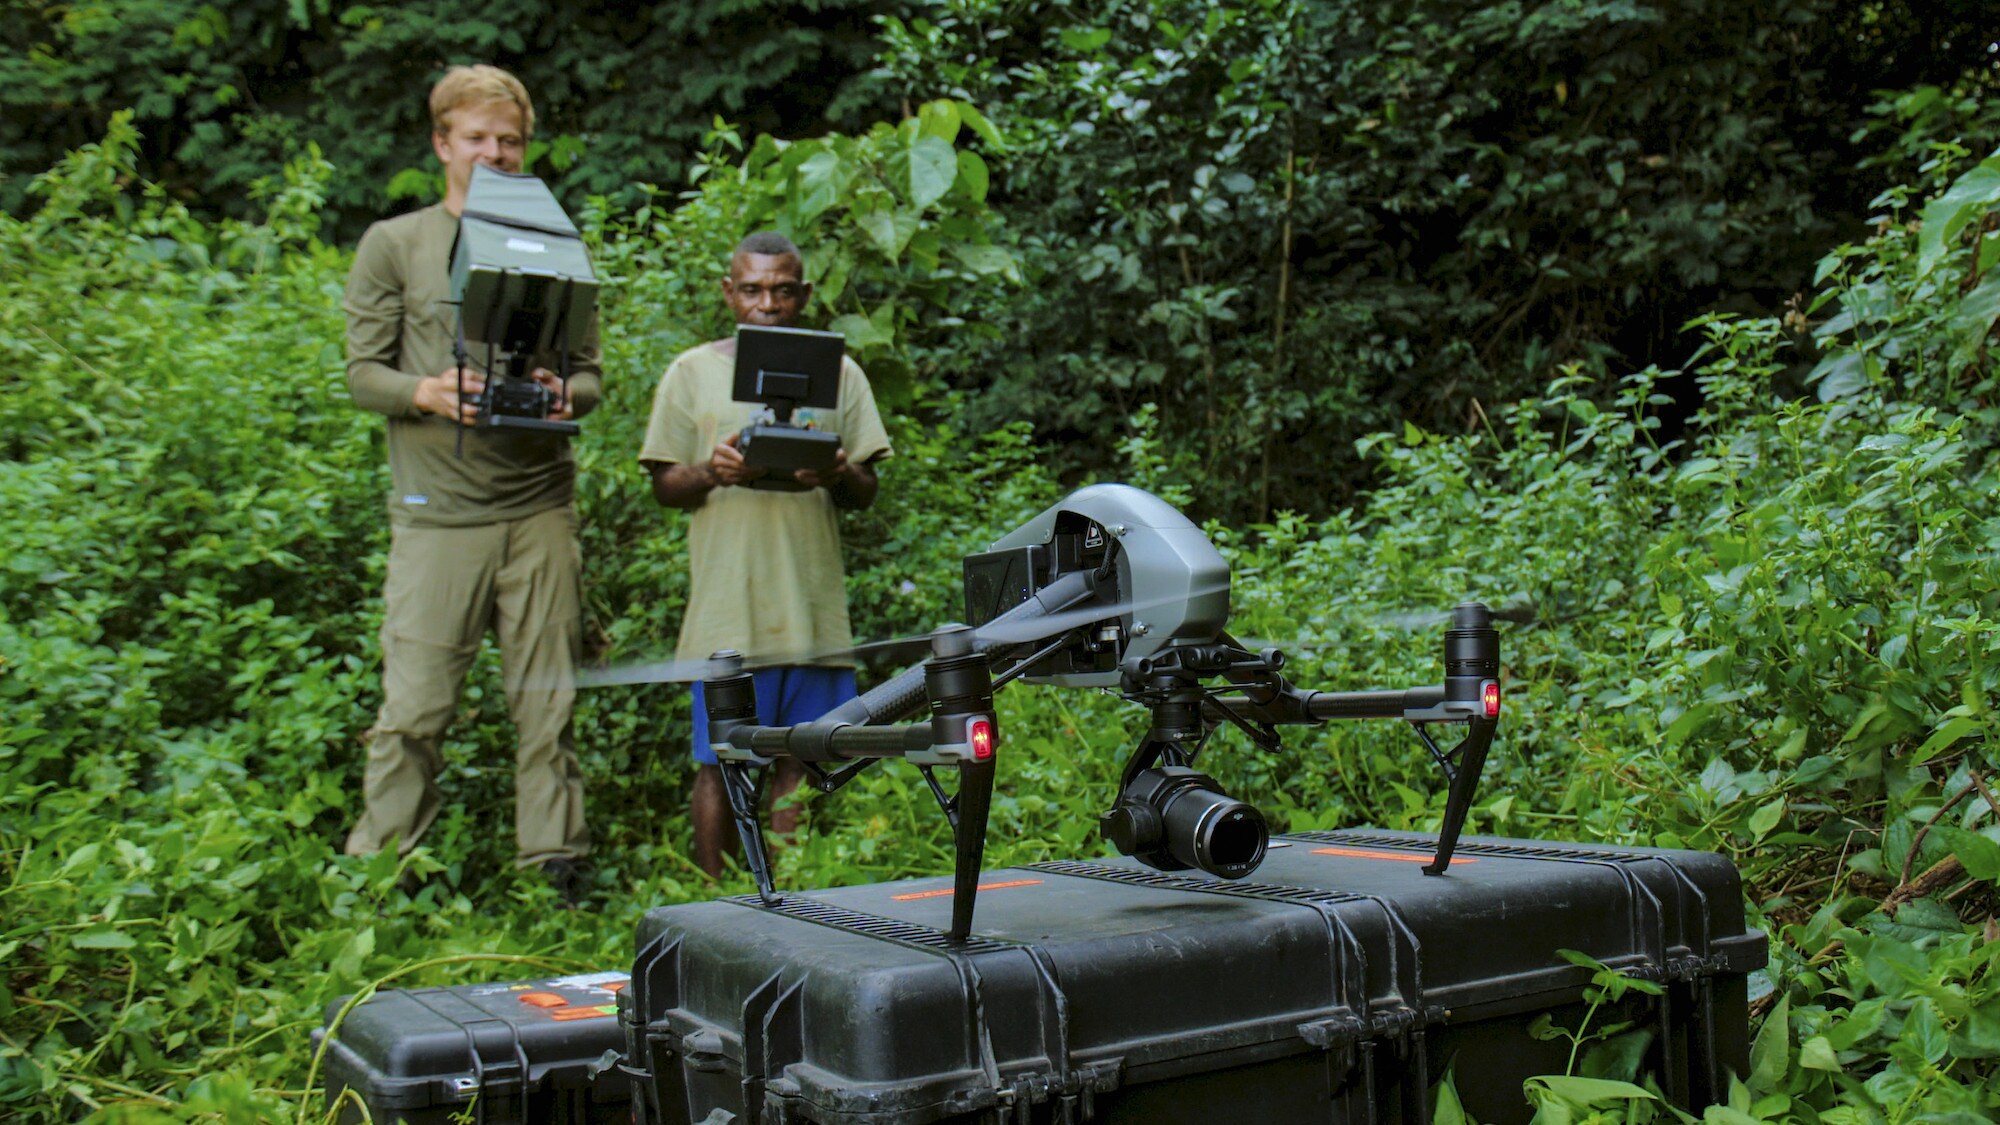 Bertie Gregory and Ngbanda Bathelomie with the drone in foreground about to take off.  (National Geographic for Disney+/Mark Mclean)